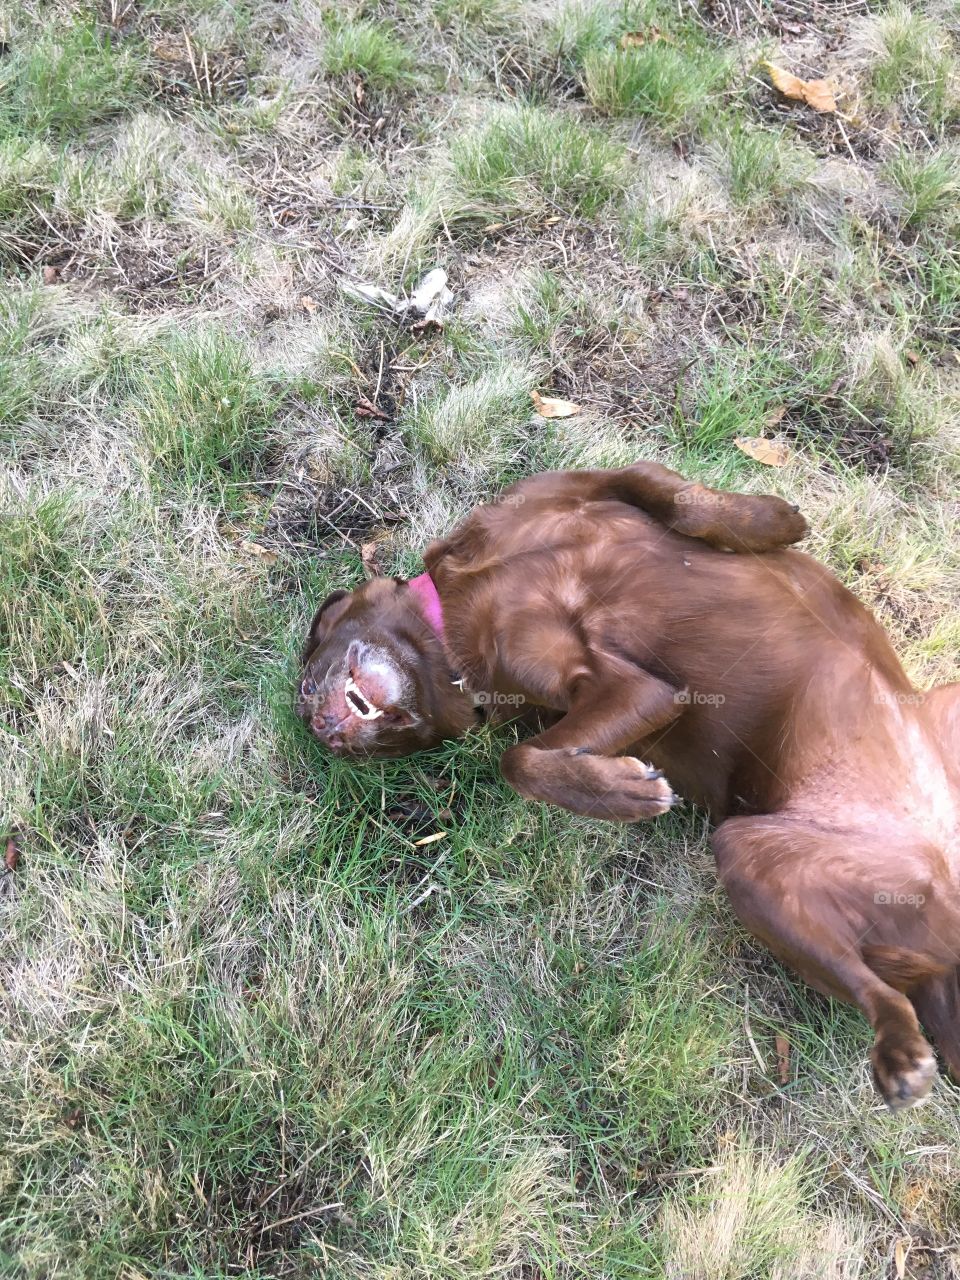 Rolling in the grass in the summer!